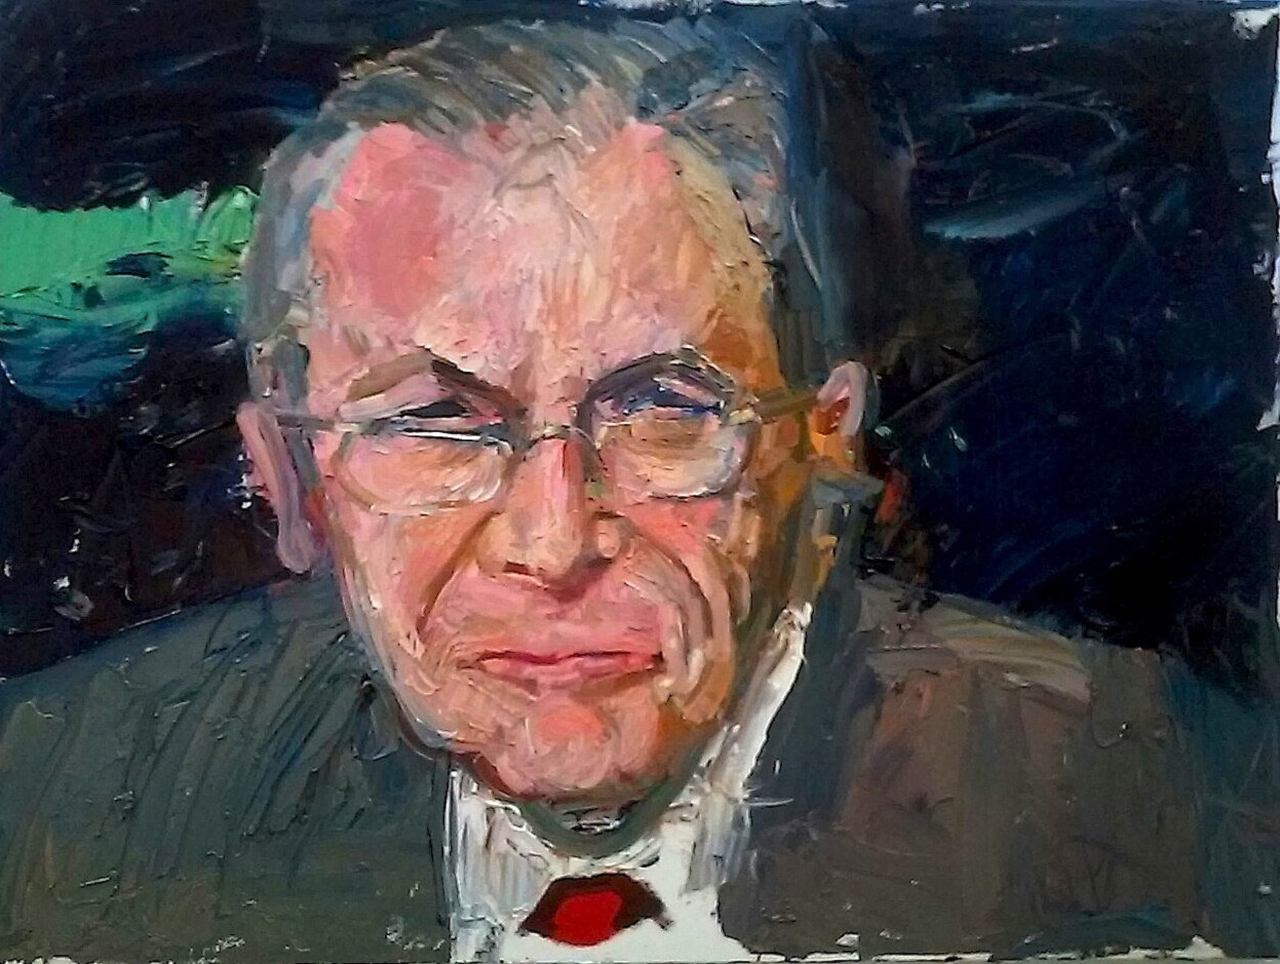 Unknown Unknowns, 18x24 oil on canvas, Sandra Koponen © 2015DEPARTMENT OF DEFENSEDonald Rumsfeld, Secretary of Defense Jan. 20, 2001 - Dec. 18, 2006As head of the Defense Department, Rumsfeld was directly or indirectly responsible for the gross abuses committed at Abu Ghraib, Guantanamo Bay, Bagram, and other military detention centers. Along with Vice President Cheney and others, he opposed recognizing the rights of detainees under the Geneva Conventions, and he instructed the Joint Chiefs of Staff that those rights did not apply. He was also a member of the National Security Council Principals Committee, which approved the CIA&rsquo;s use of harsh interrogation techniques.On Dec. 2, 2002, Rumsfeld signed an action memo authorizing the military to use harsh interrogation techniques based on those used at a DOD program established to help U.S. forces withstand torture. He withdrew the authorization in January 2003 but then convened a working group on interrogation, and approved a new set of harsh techniques three months later. In August and September 2003, he sent Major General Miller, the commander at Guantanamo Bay, to Iraq to &ldquo;Gitmo-ize&rdquo; Abu Ghraib. Rumsfeld stood by the military&rsquo;s interrogation policies despite continuously mounting evidence of abuse at the hands of military interrogators.Rumsfeld also specifically approved the brutal interrogation plan for Mohammed al-Qahtani at Guantanamo Bay, who was harshly interrogated for 50-plus days, and a &ldquo;special interrogation plan&rdquo; for Mohamedou Slahi, another Guantanamo prisoner, who was subsequently subjected to a mock execution at sea, solitary confinement, beatings, sexual humiliation, and environmental manipulation.**Excerpted from the ACLU’s infographic, “The Architects of Torture” https://www.aclu.org/infographic/infographic-torture-architects